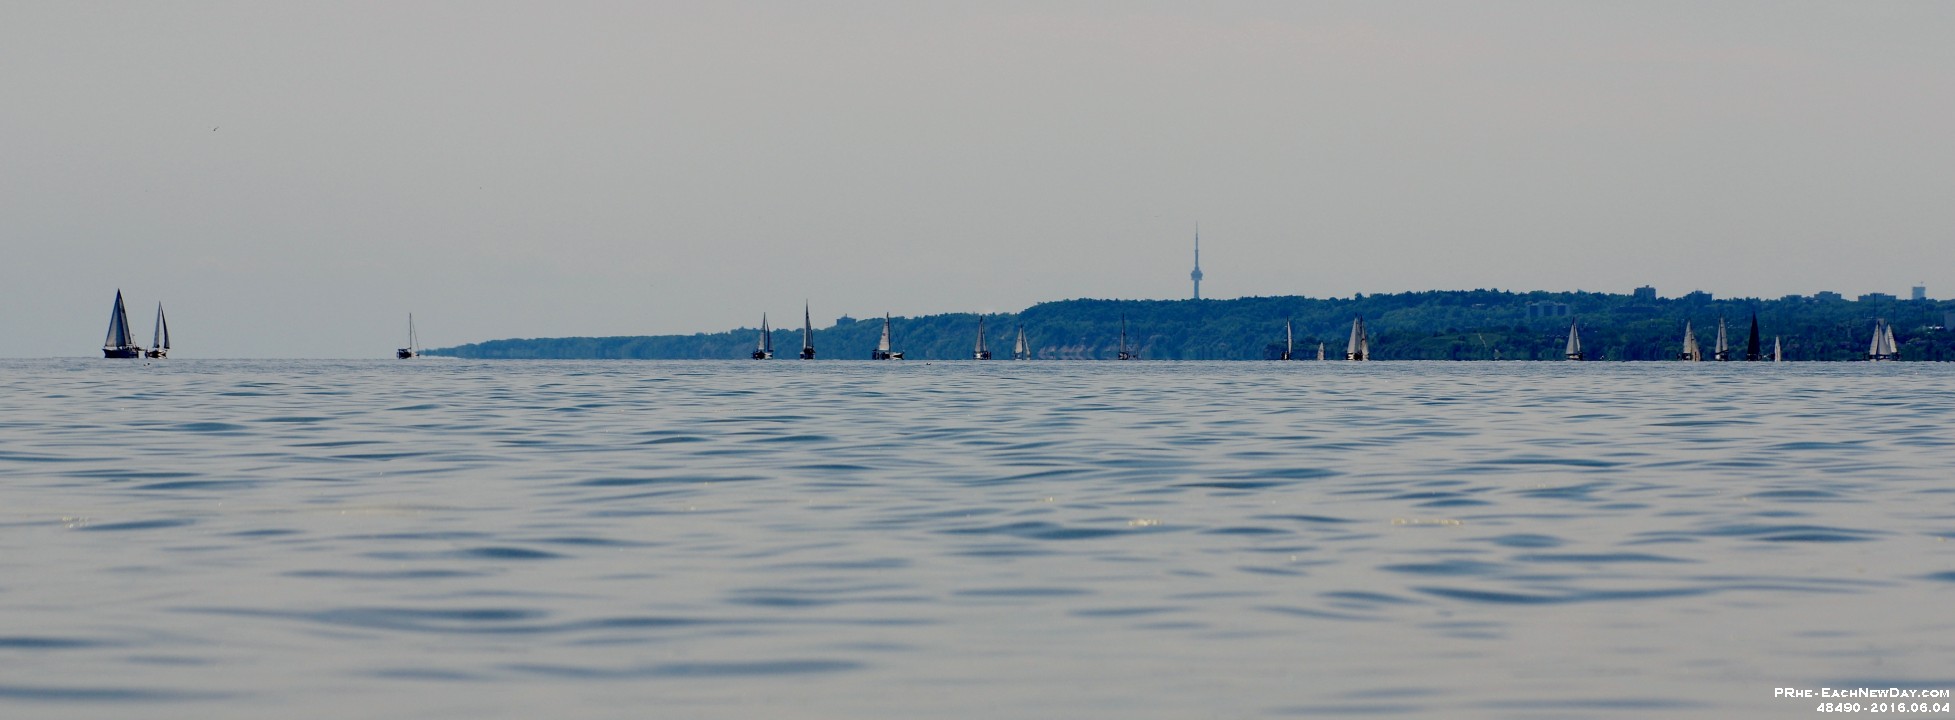 48490RoCrLeRe - Kayaking with Andy - Alex on Duffins Creek - Lake Ontario